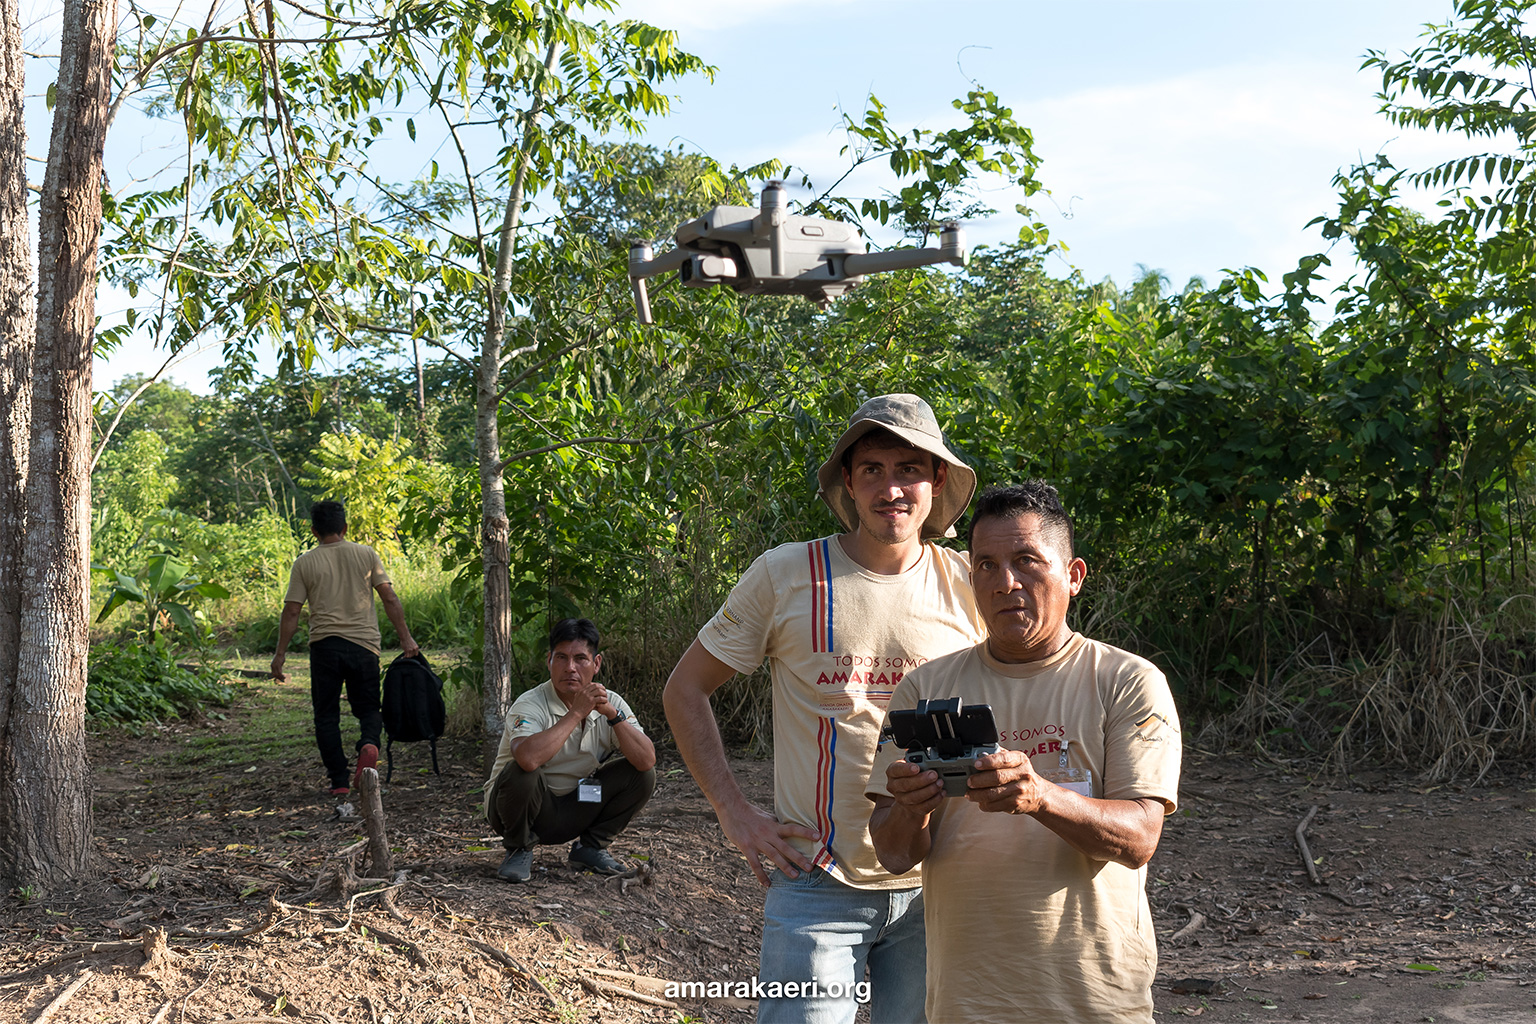 Local forest surveillance teams use a drone to carry out monitoring work at Peru’s Amarakaeri Communal Reserve. 